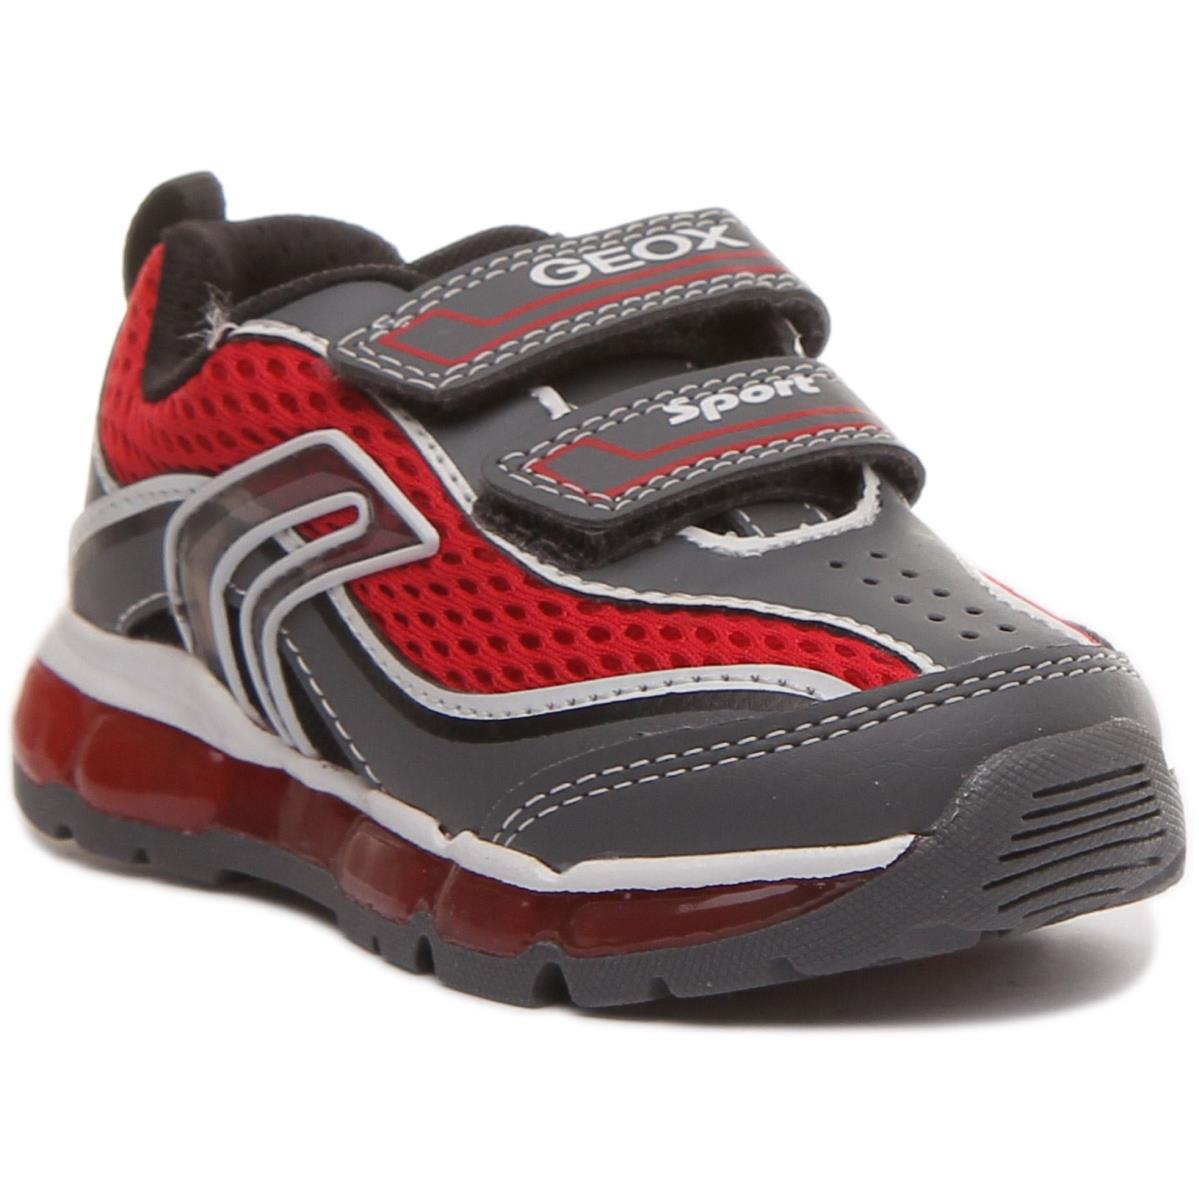 Geox J Kids Android Kids Two Strap Light Up Sneakers In Grey Red Size US 8 - 13 GREY RED